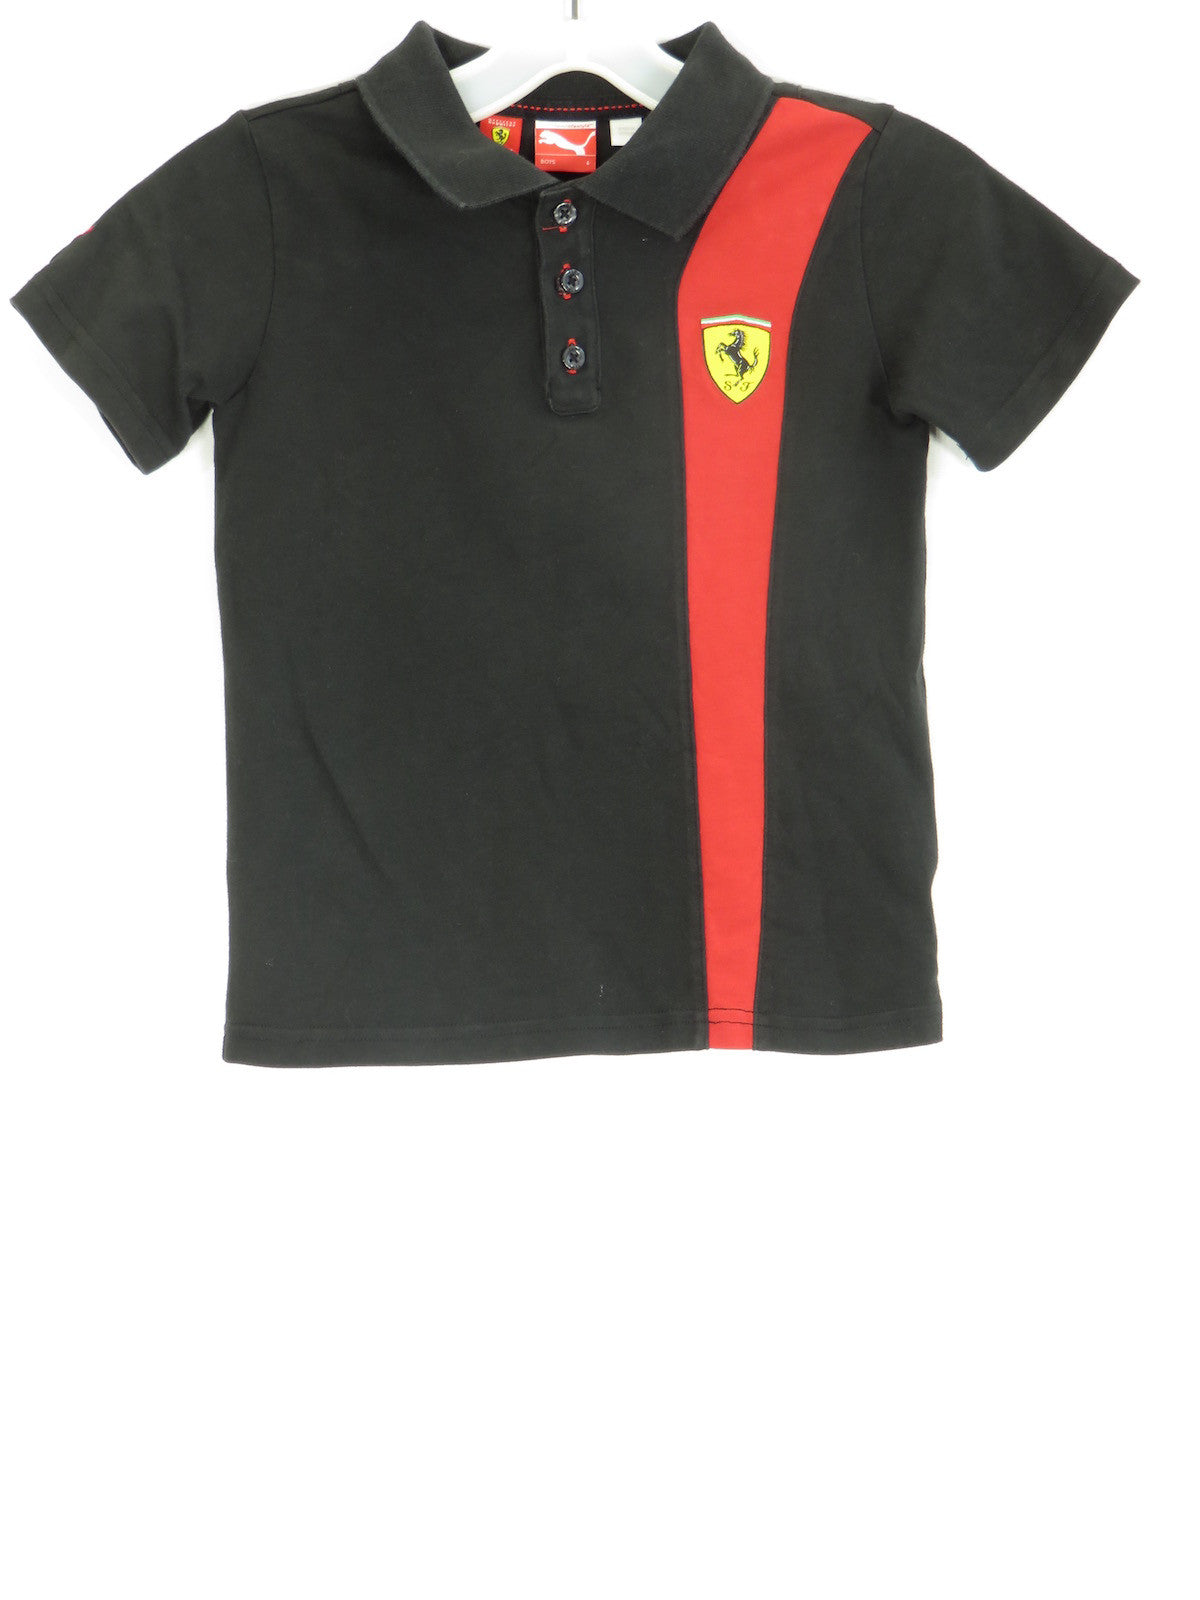 black polo shirt with red horse